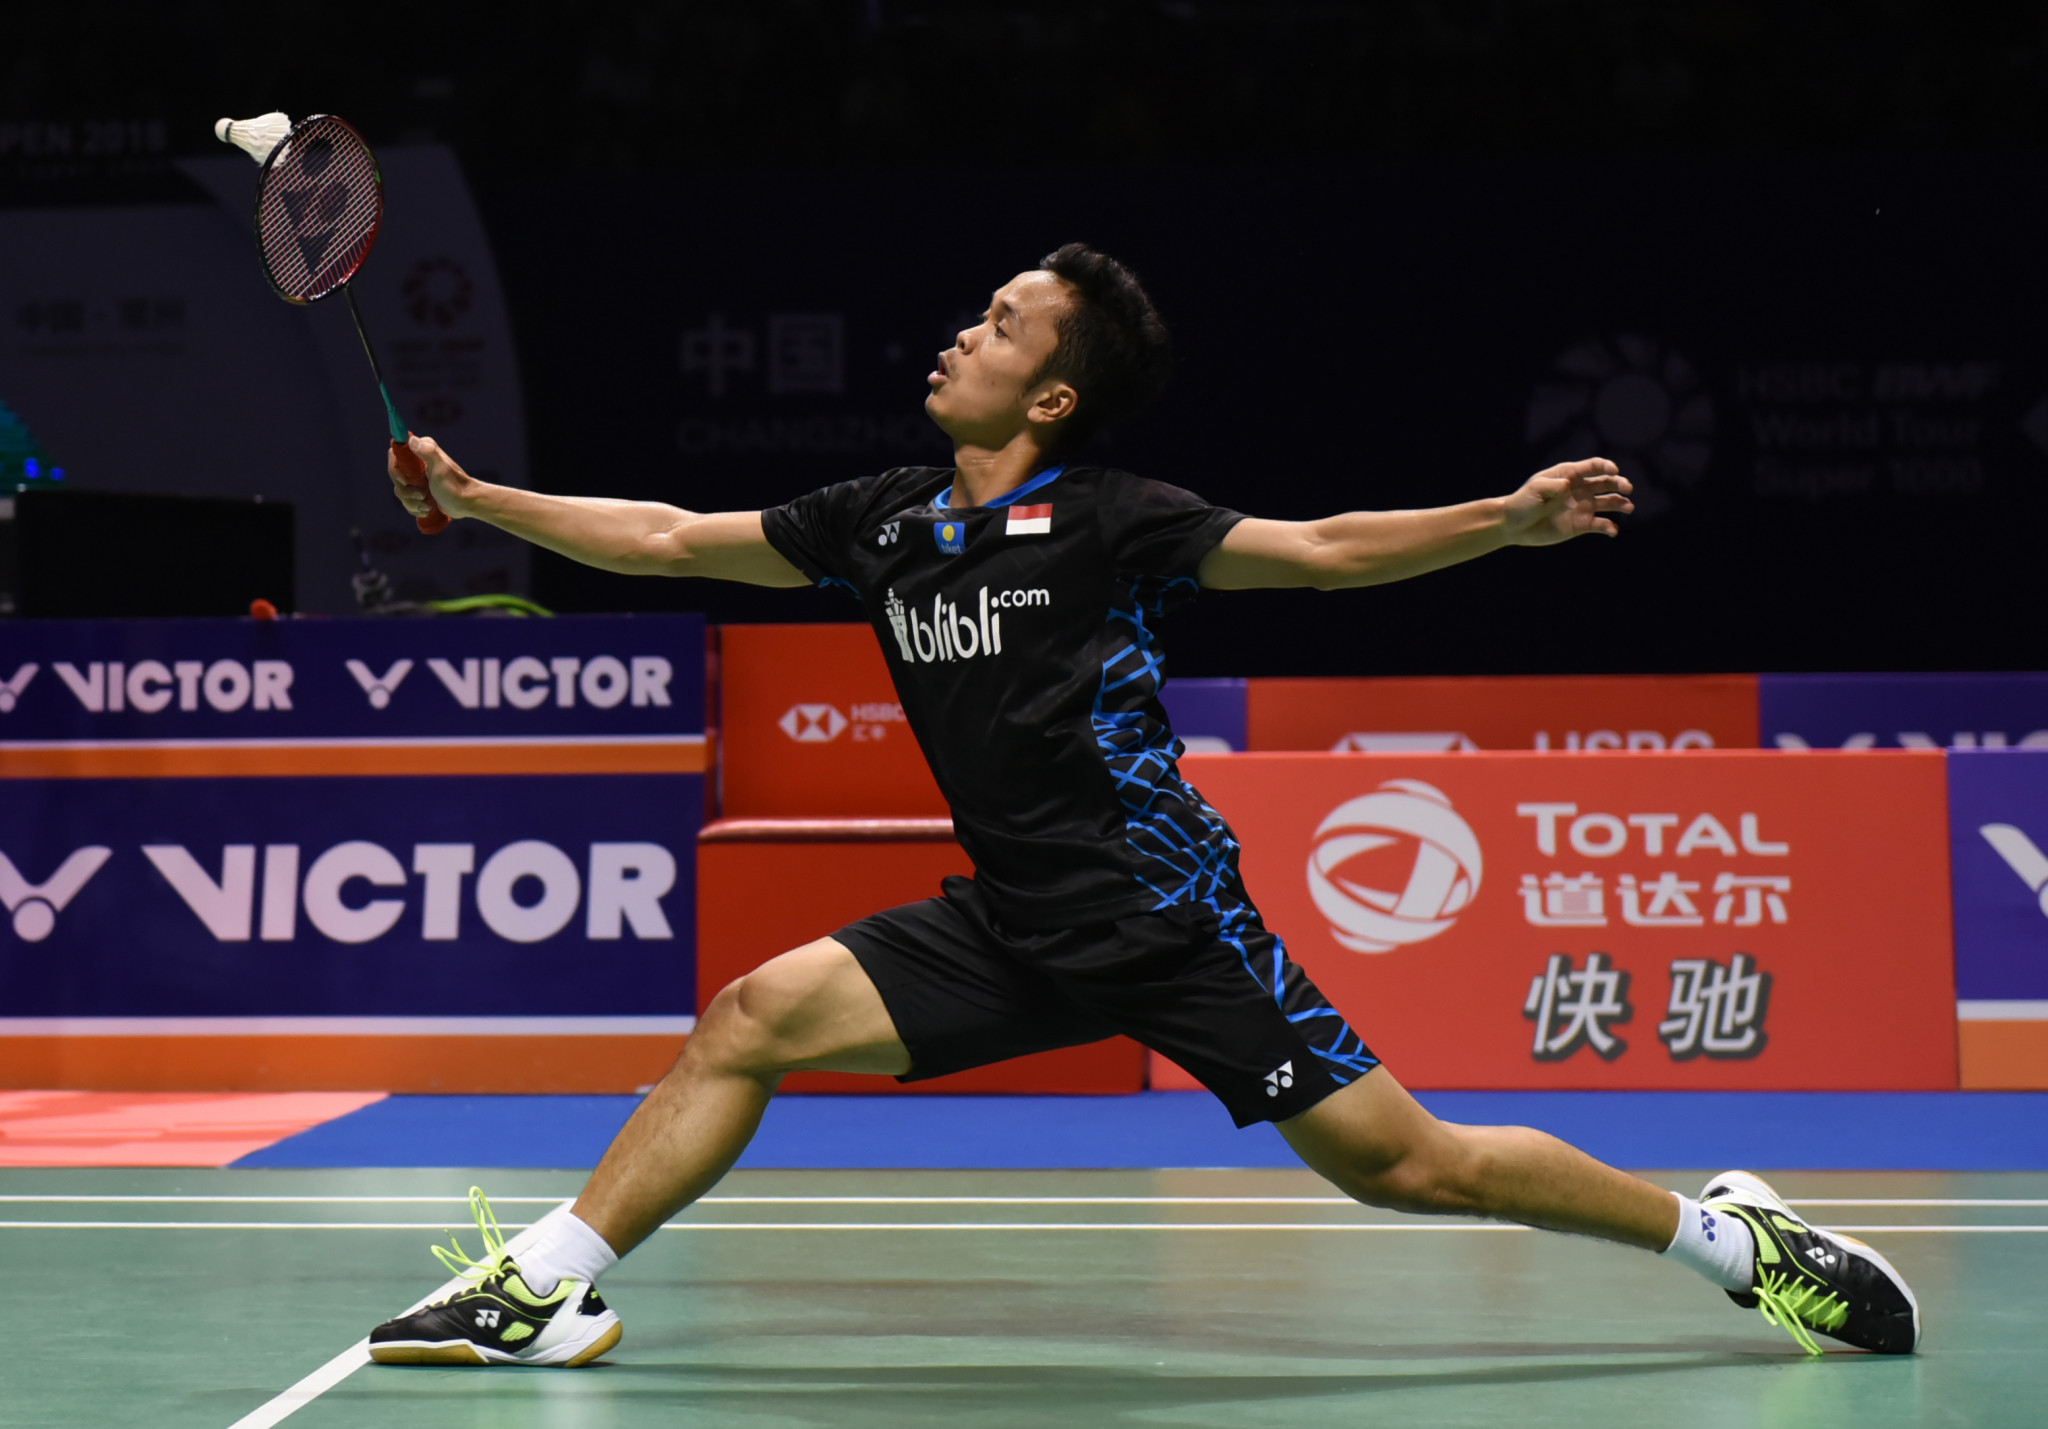 Anthony ginting